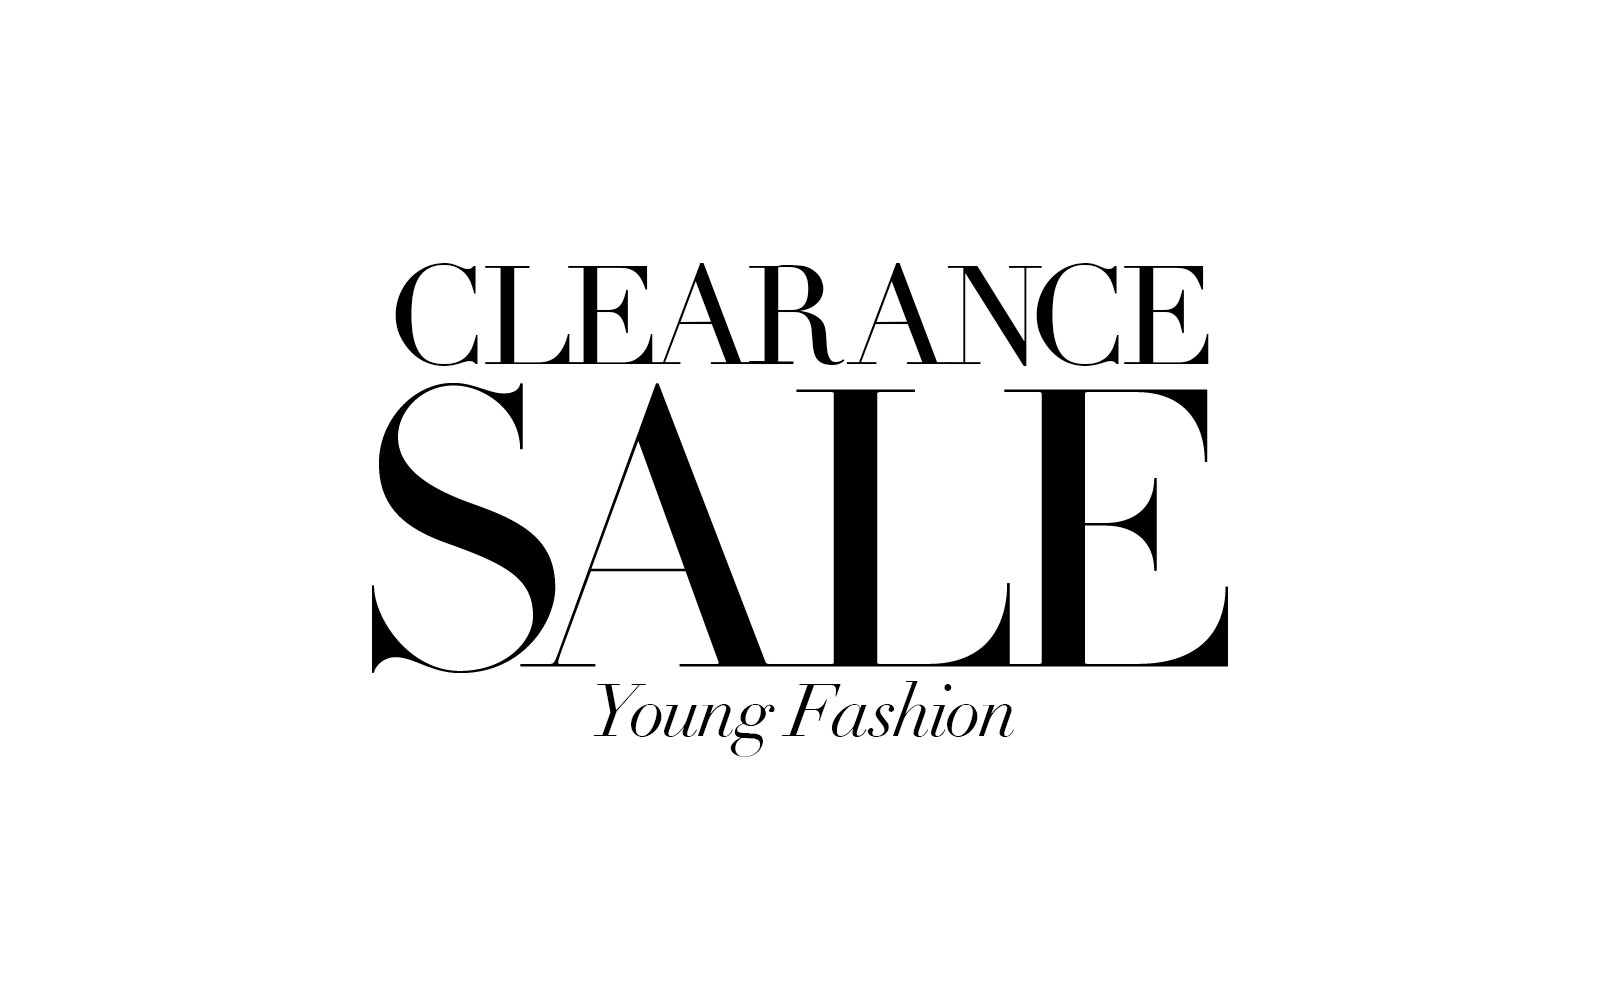 Young Fashion Clearance